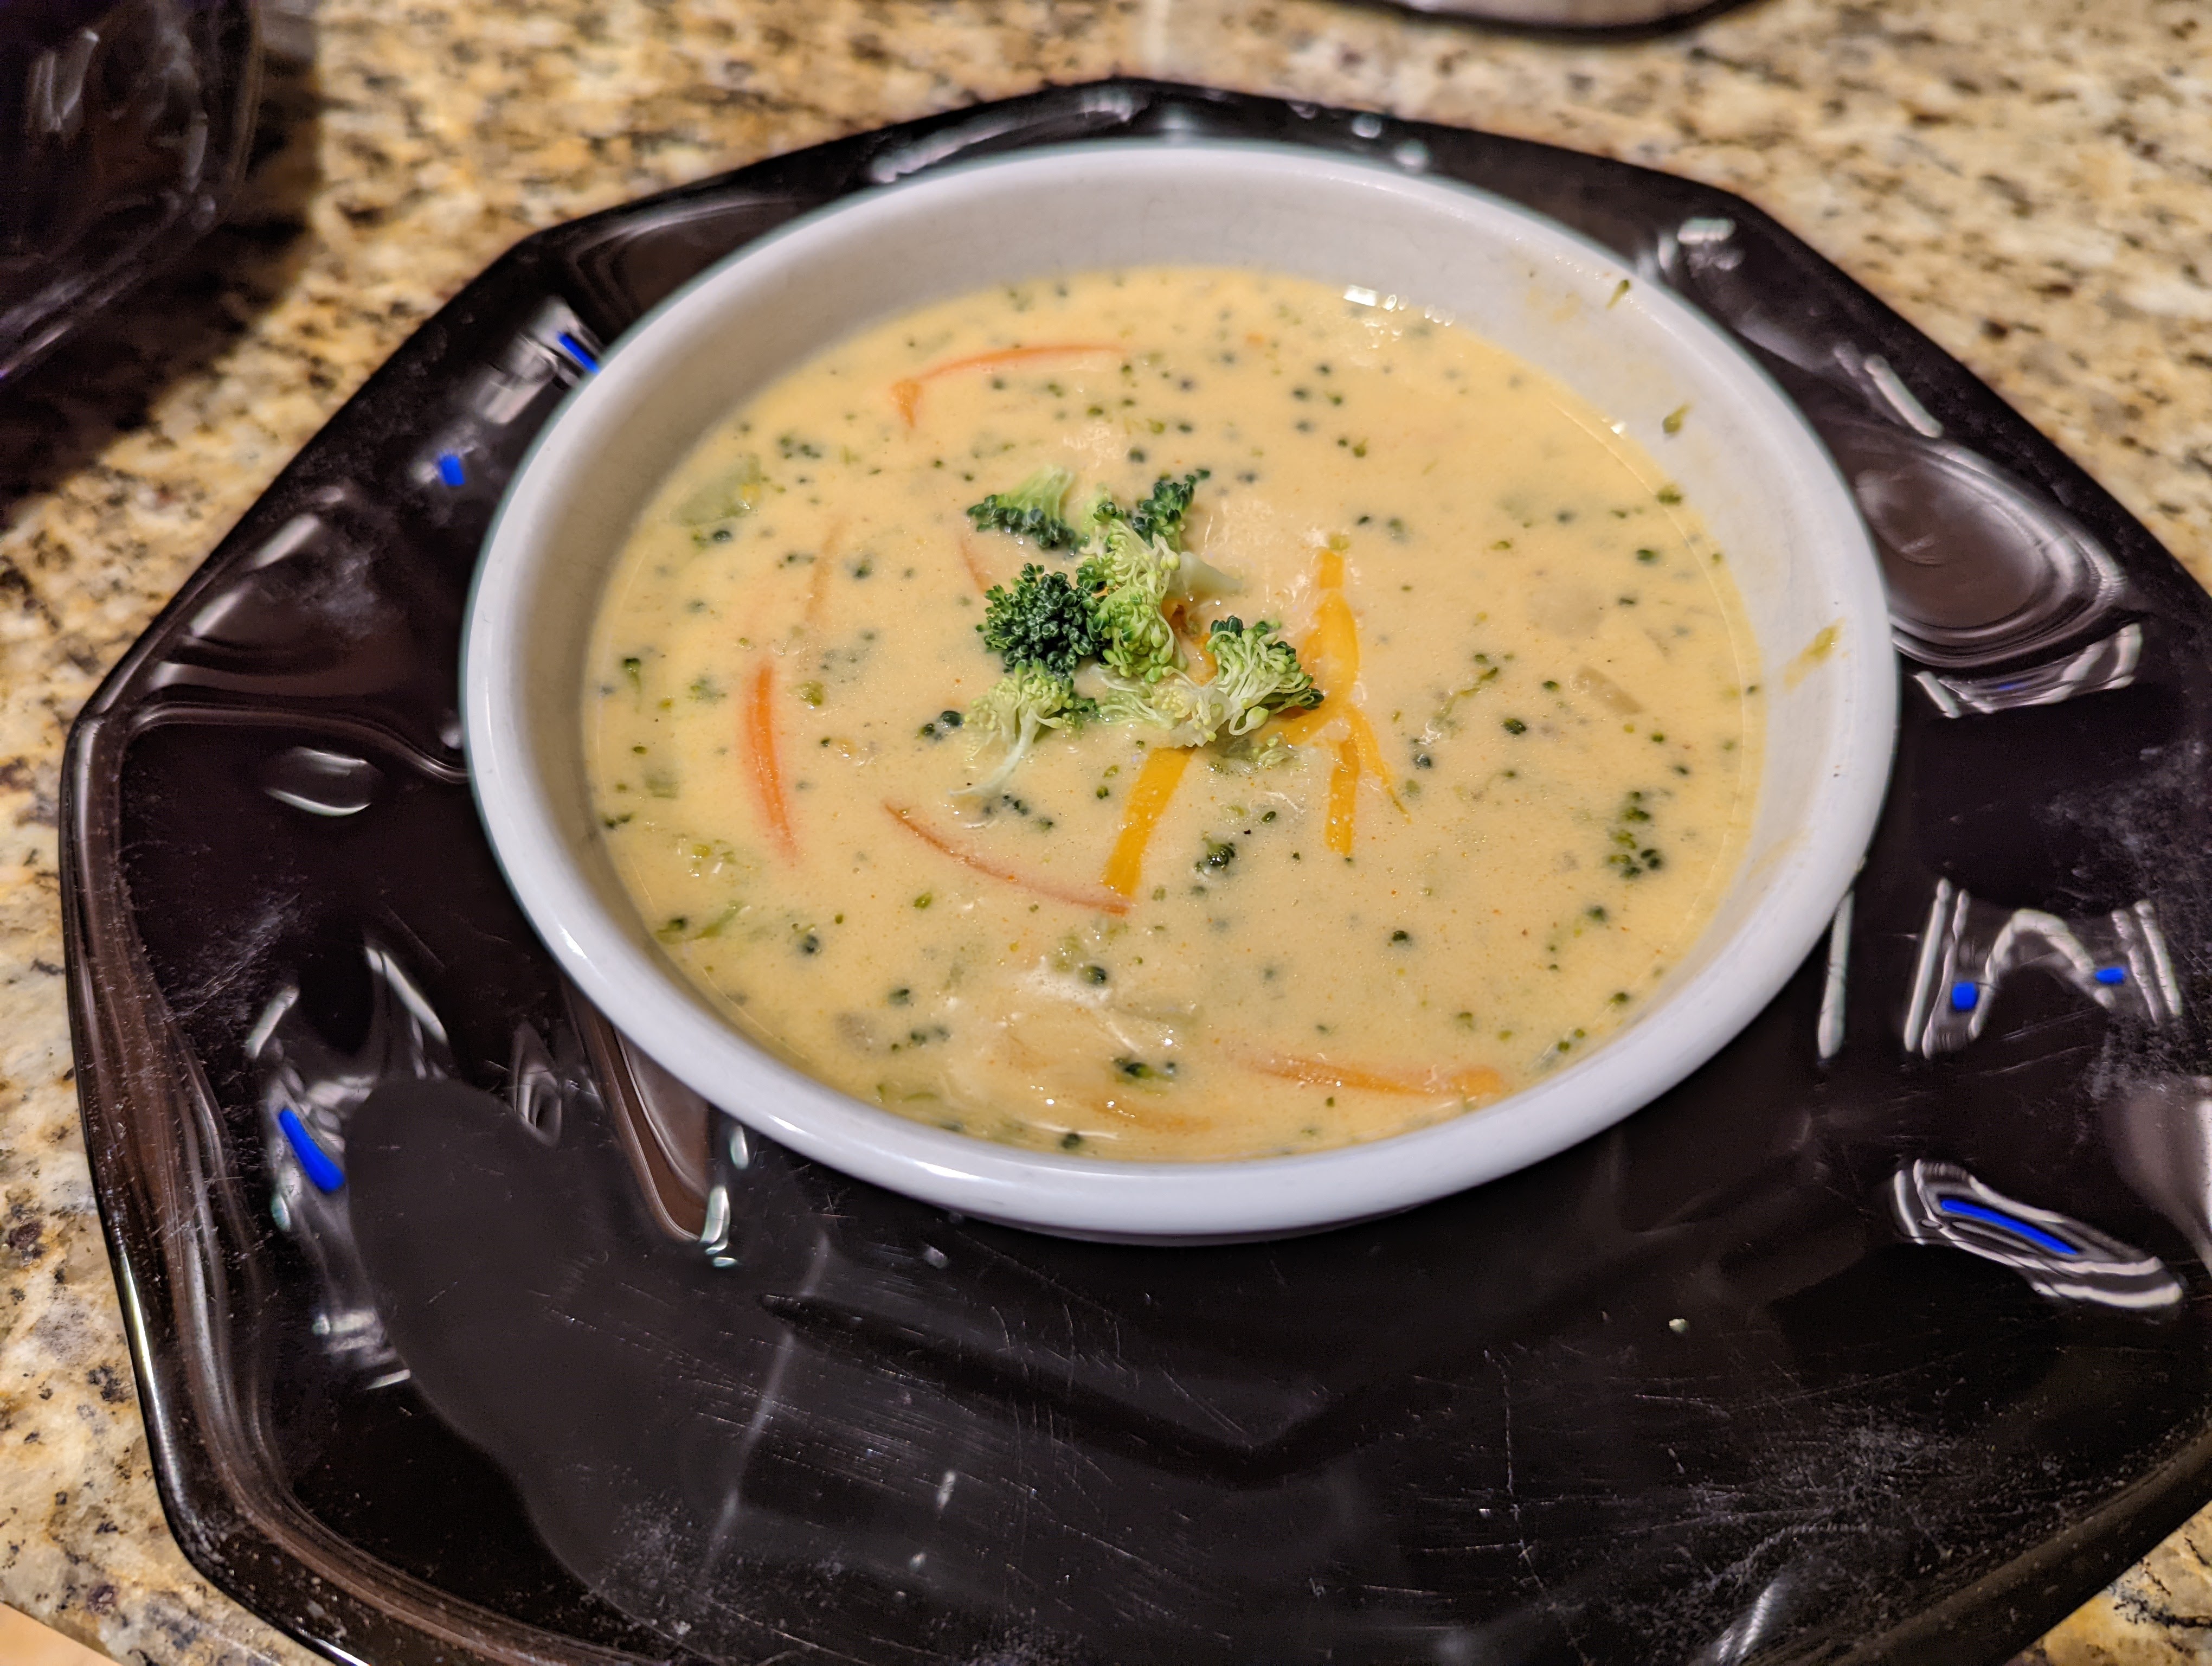 Healthy-ish Broccoli Cheddar Cheese Soup from above